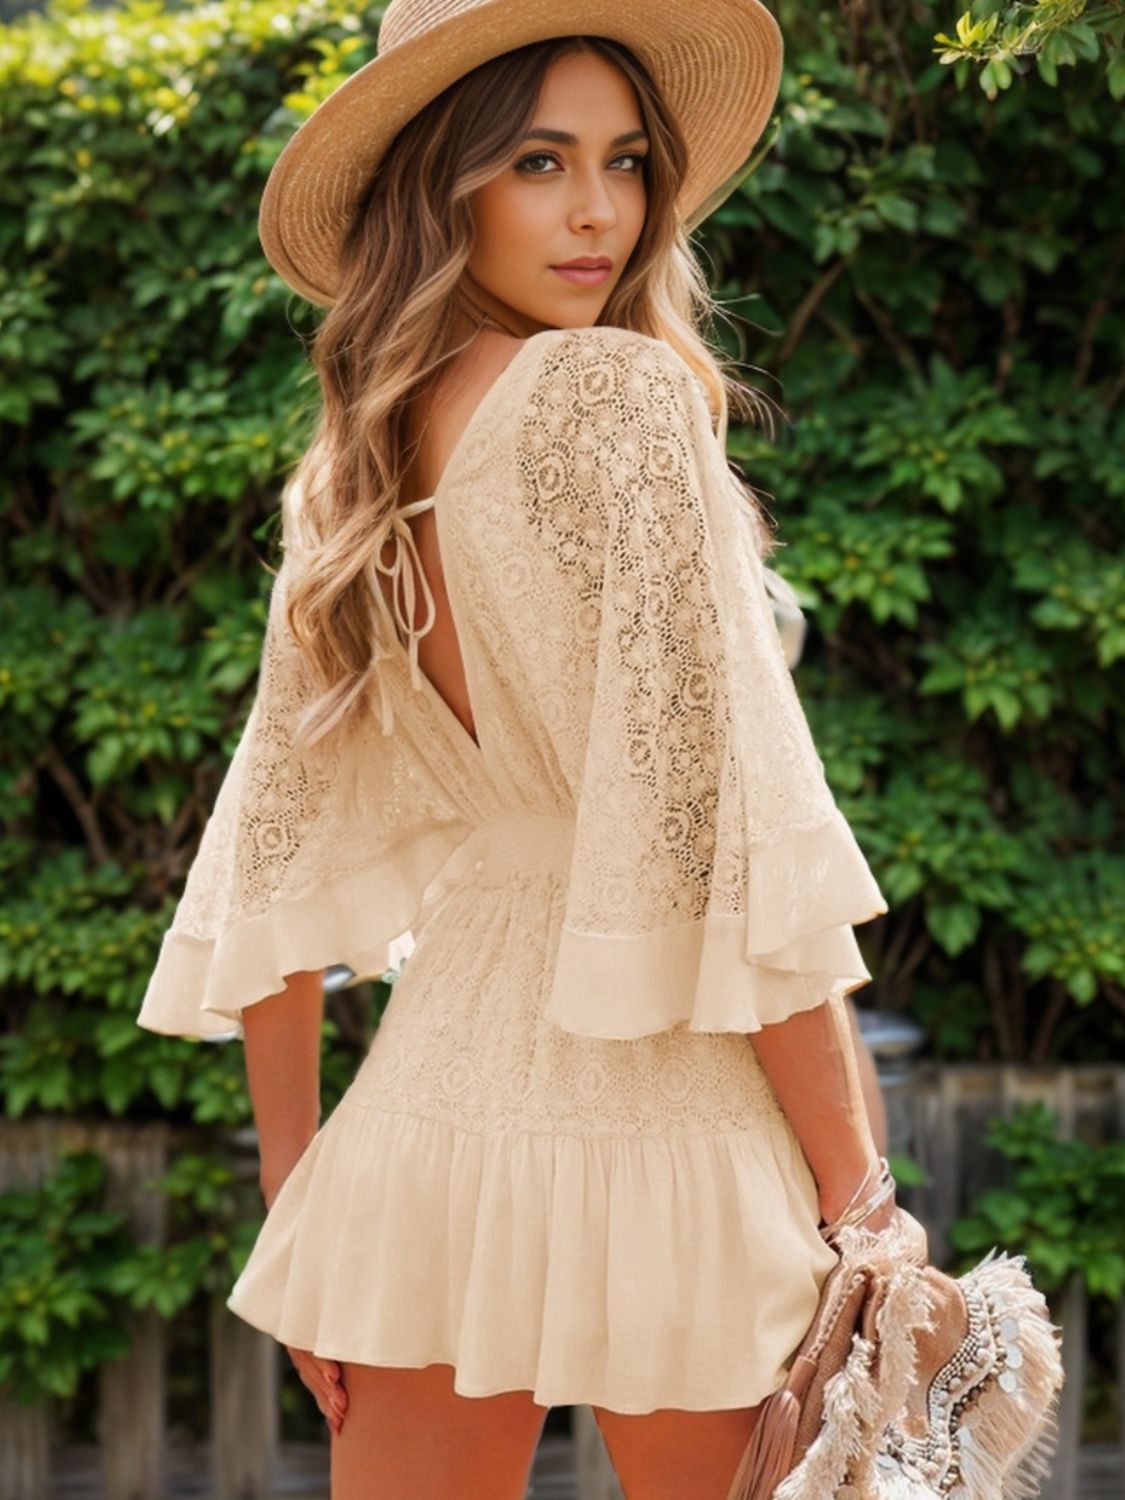 Fashionable woman posing in a cream lace-back mini dress with ruffle details